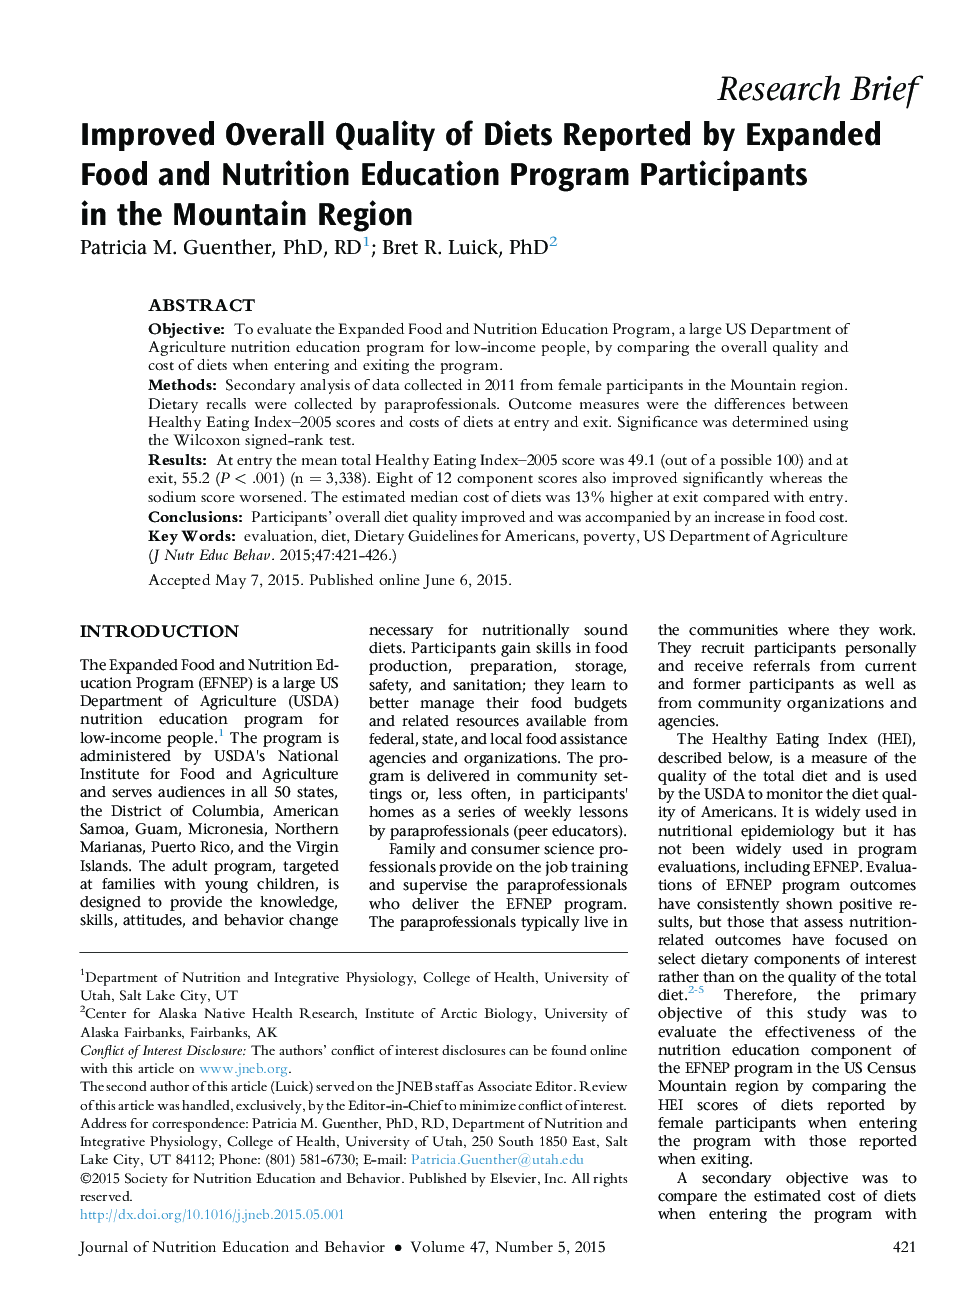 Improved Overall Quality of Diets Reported by Expanded Food and Nutrition Education Program Participants inÂ theÂ Mountain Region